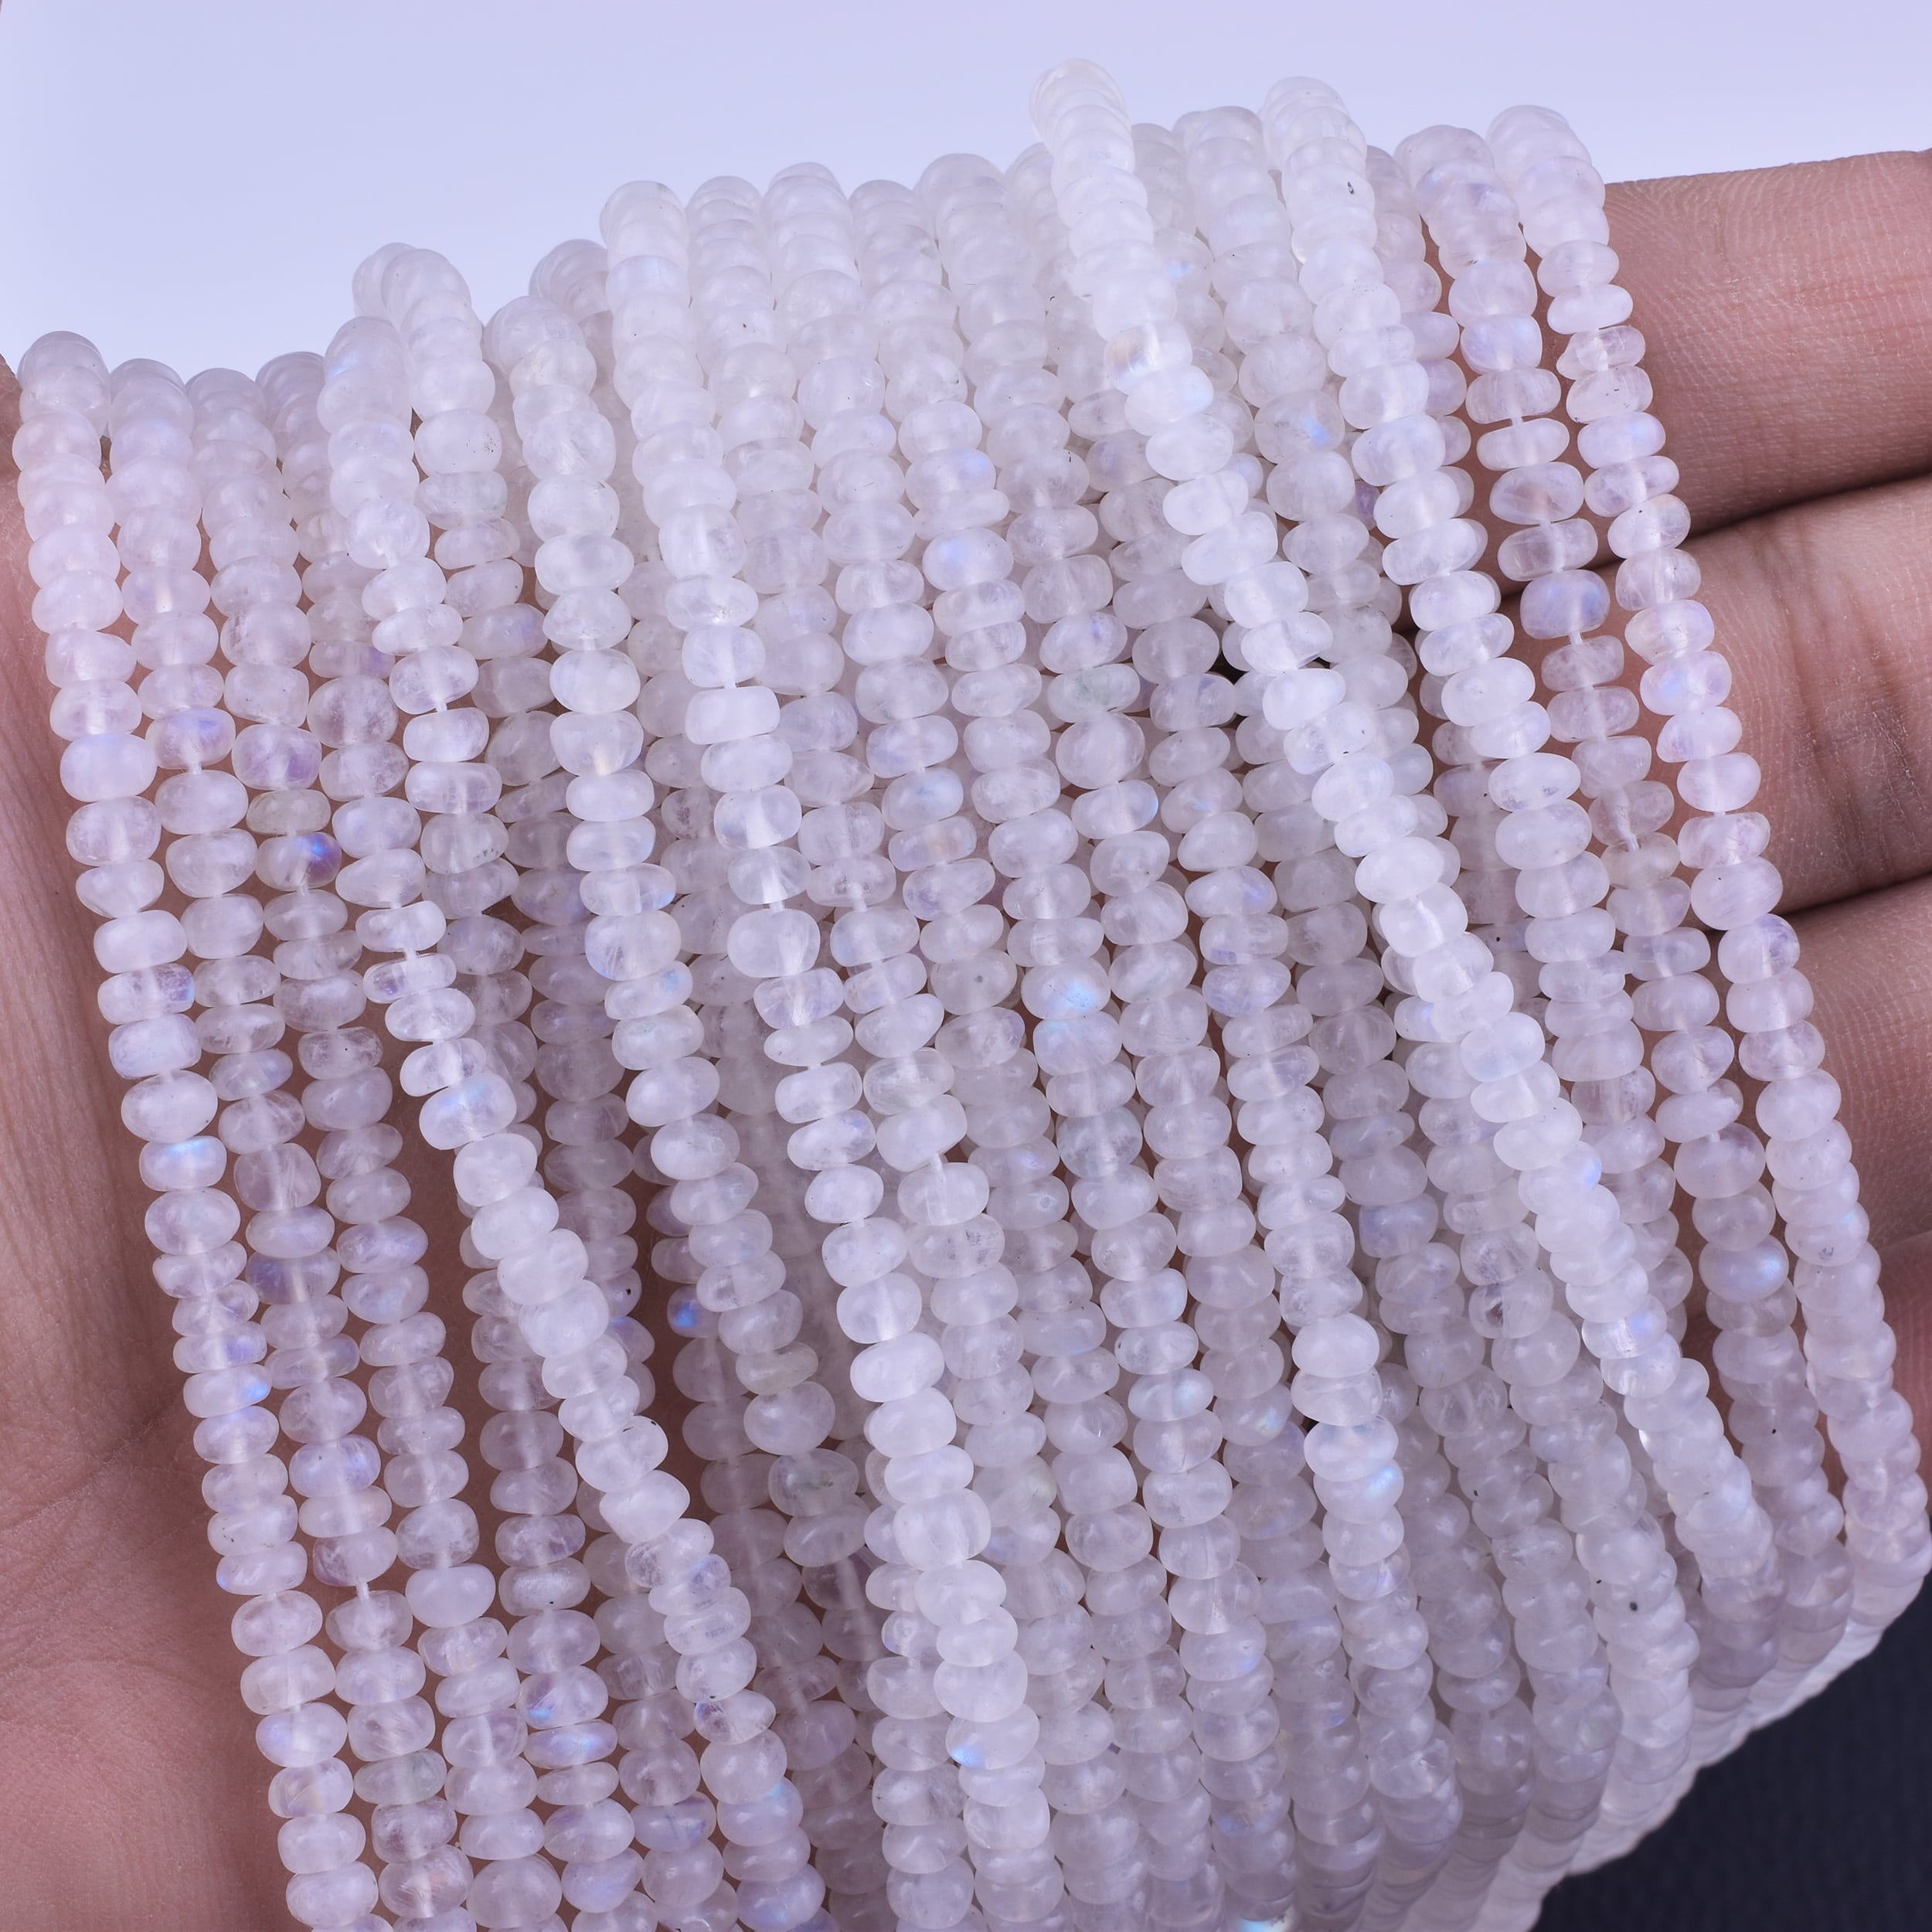 3 MM Pitch Moonstone Beads 13 Inch Moonstone Rondelle Beads Strand 5 Strand AAA Natural Pitch Moonstone Micro Faceted Rondelle Beads